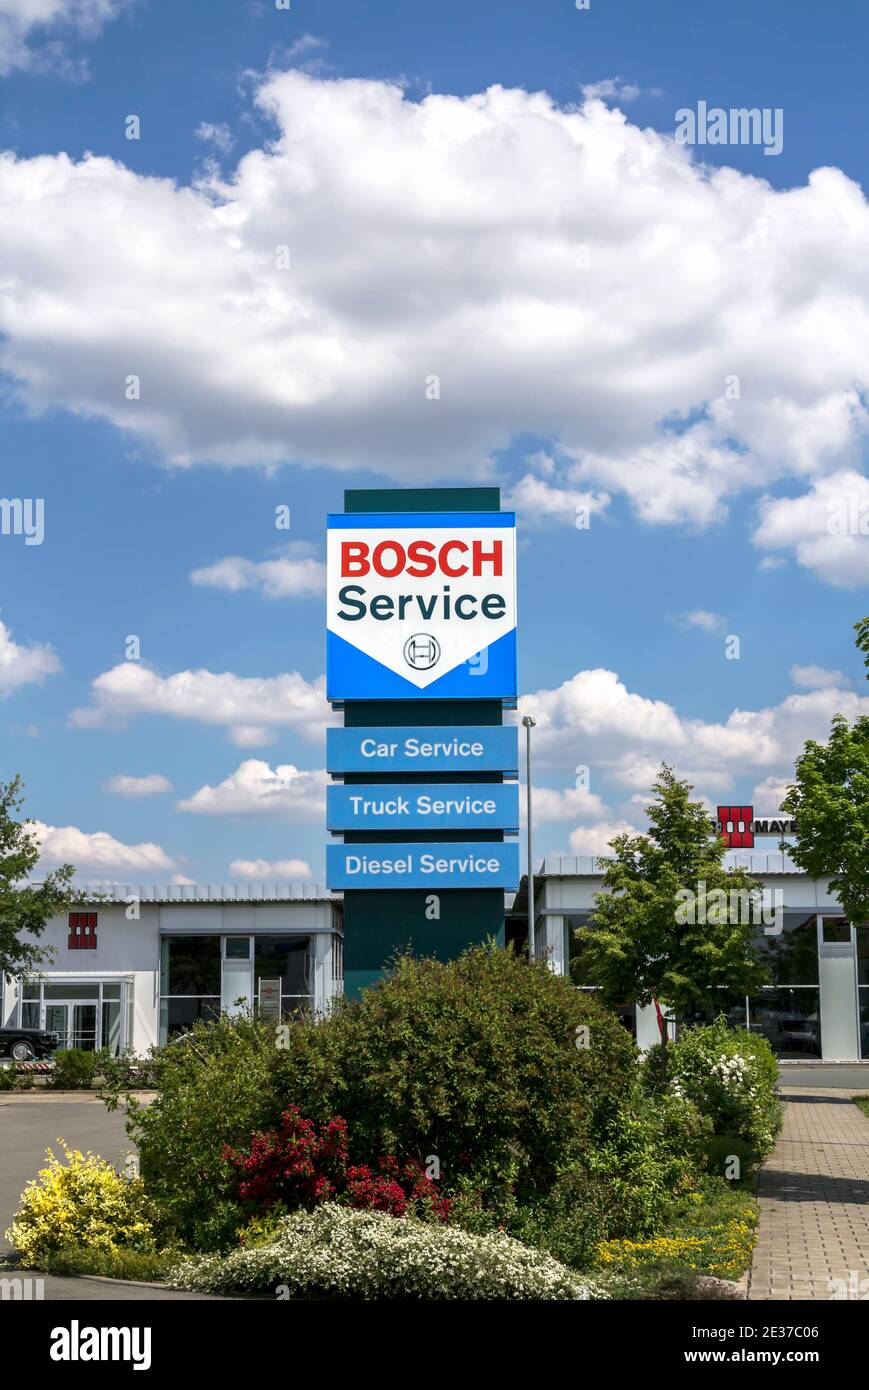 Bosch service building. Bosch is a German multinational engineering and  electronics company headquartered in Gerlingen, near Stuttgart, Germany  Stock Photo - Alamy